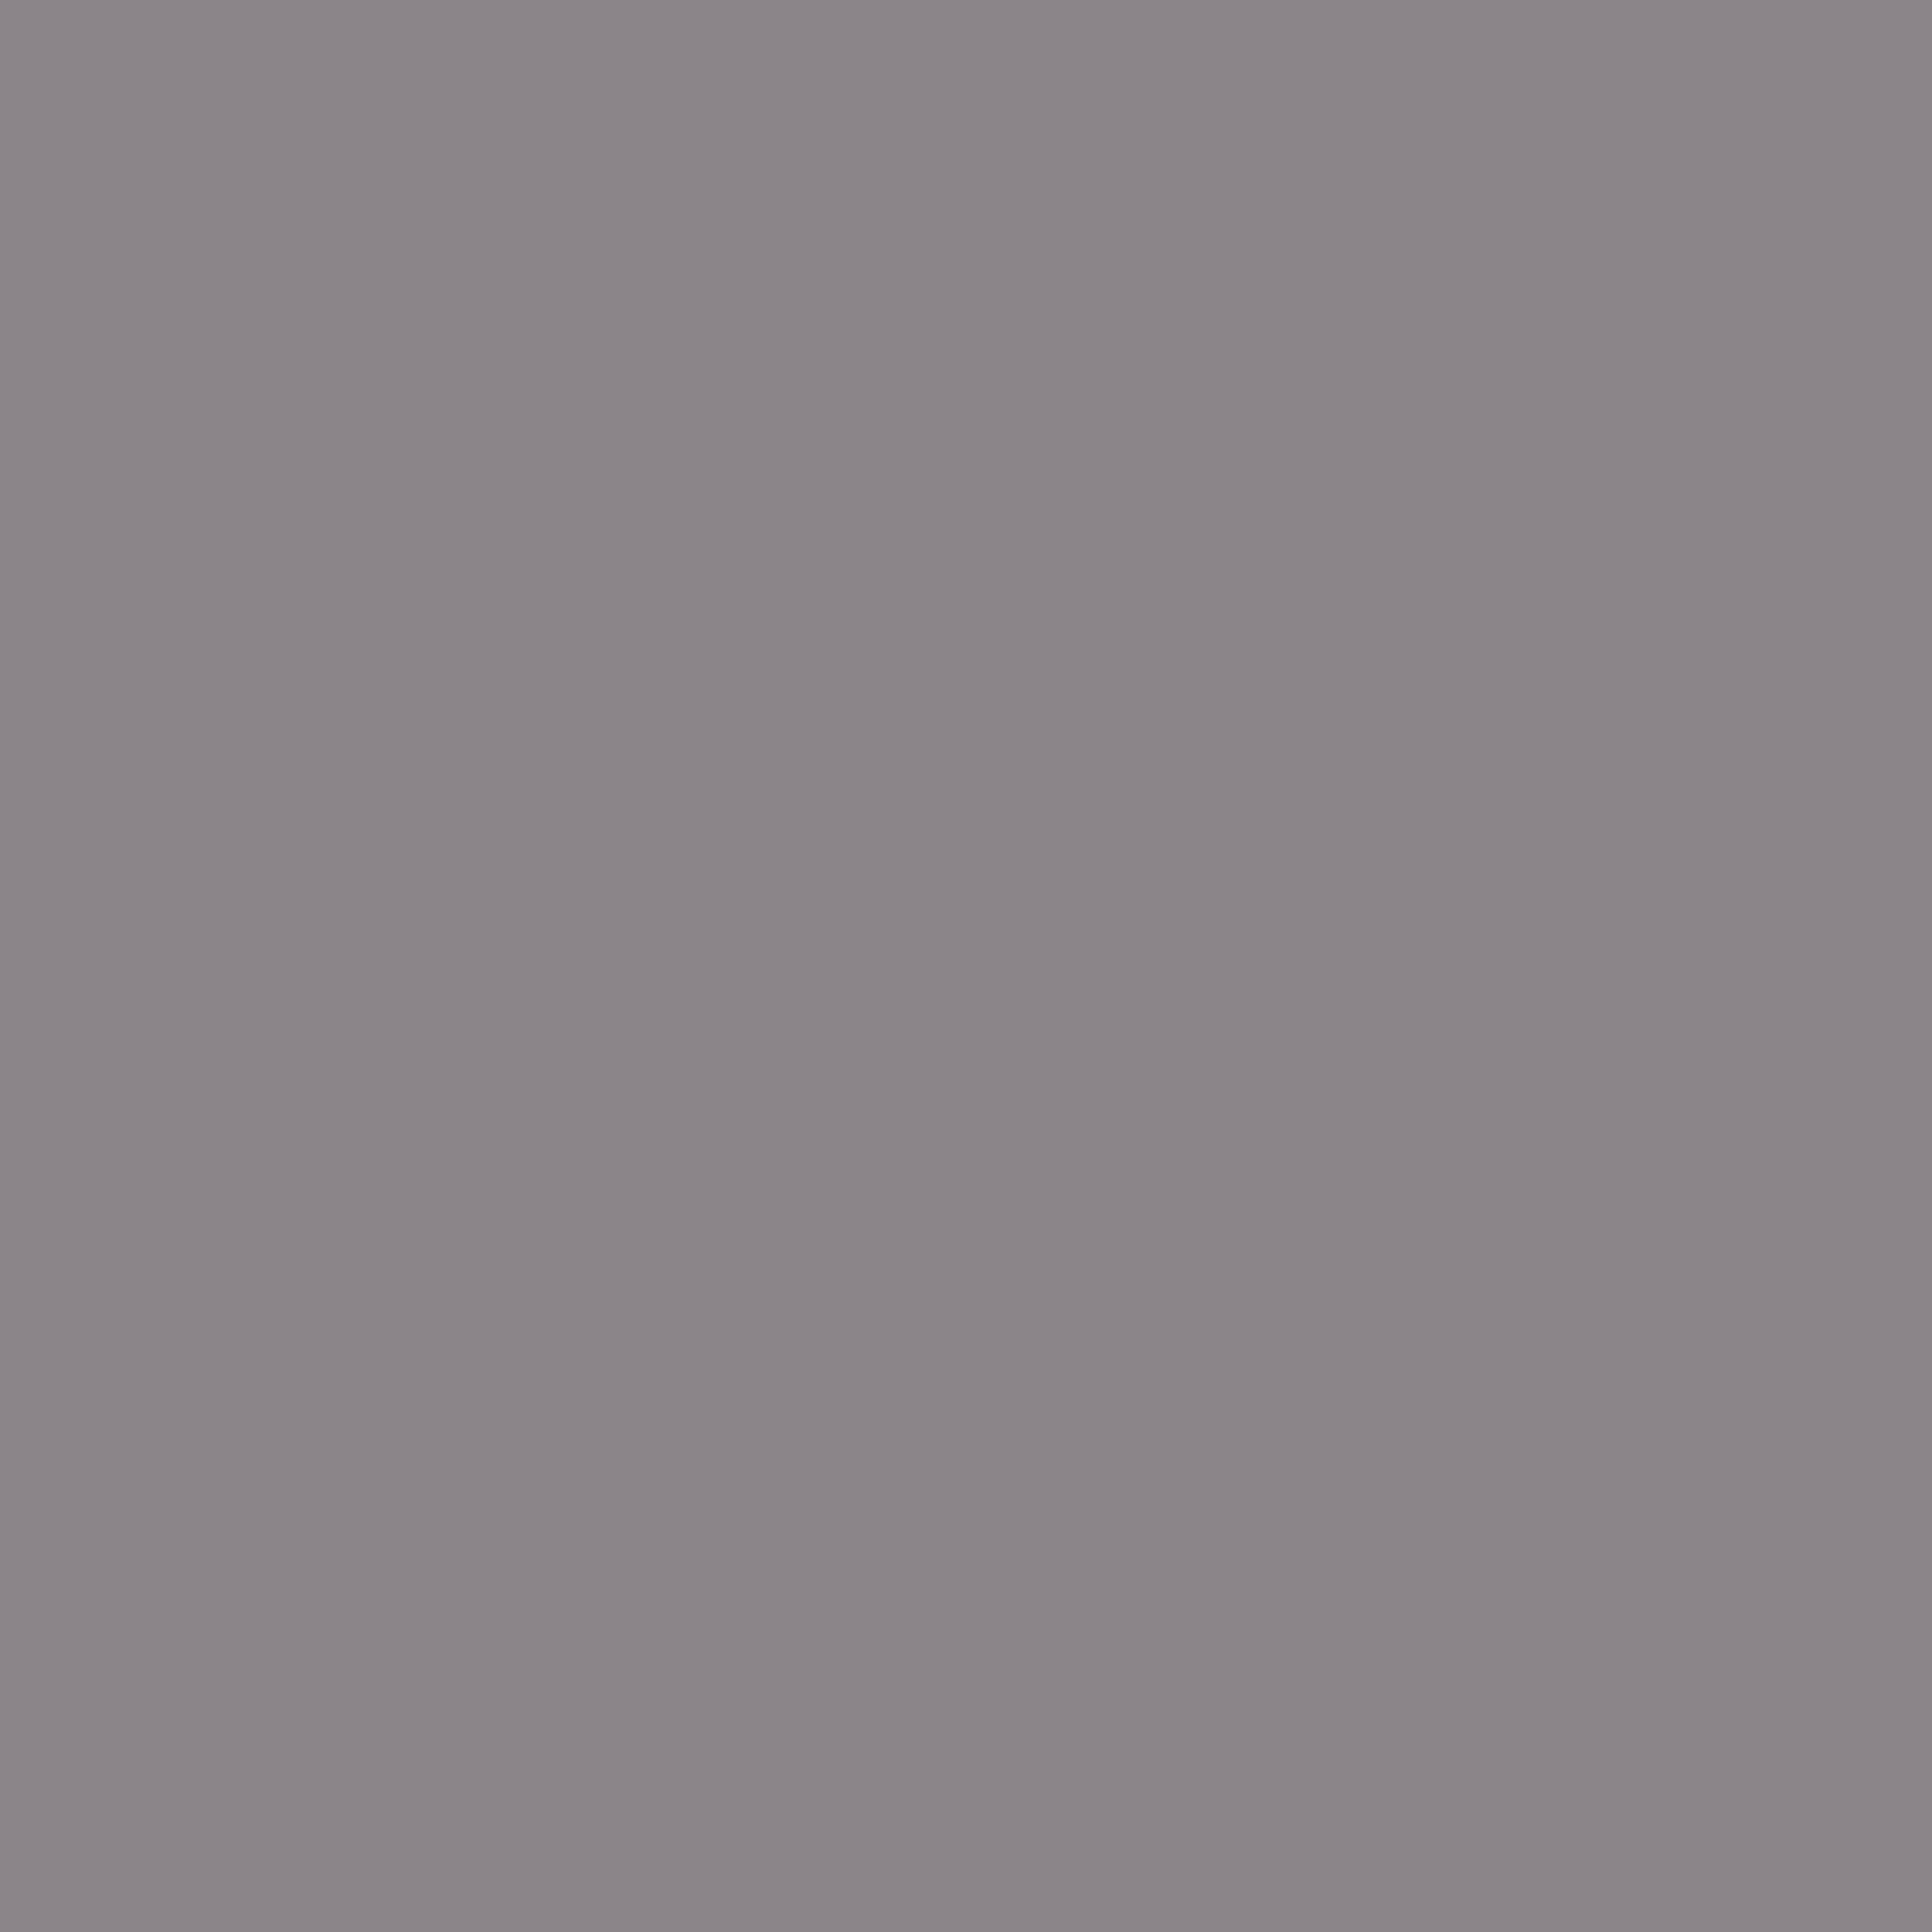 3600x3600 Taupe Gray Solid Color Background